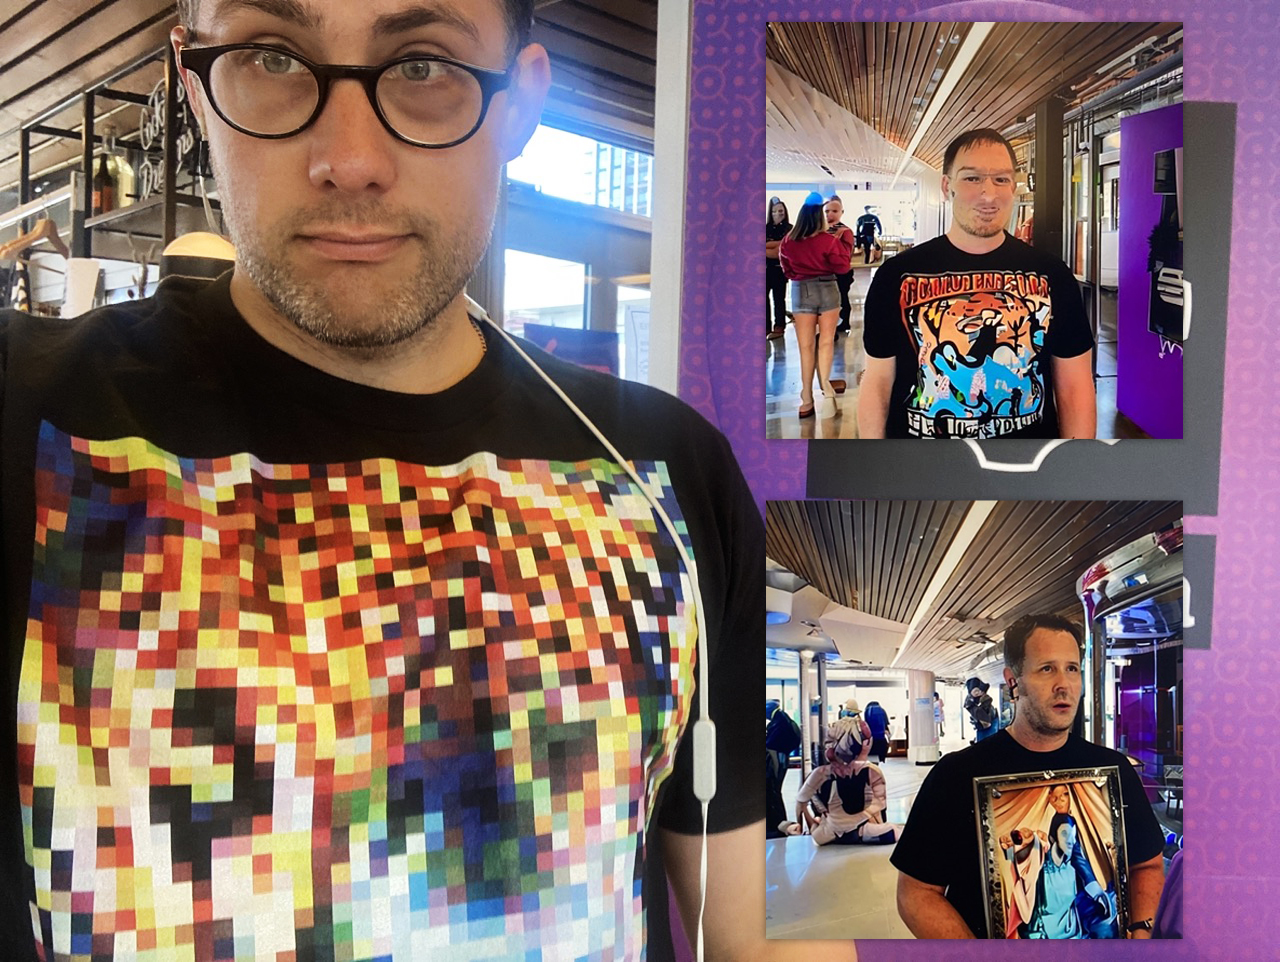 Different outputs from Jesse's adversarial pattern t-shirt.